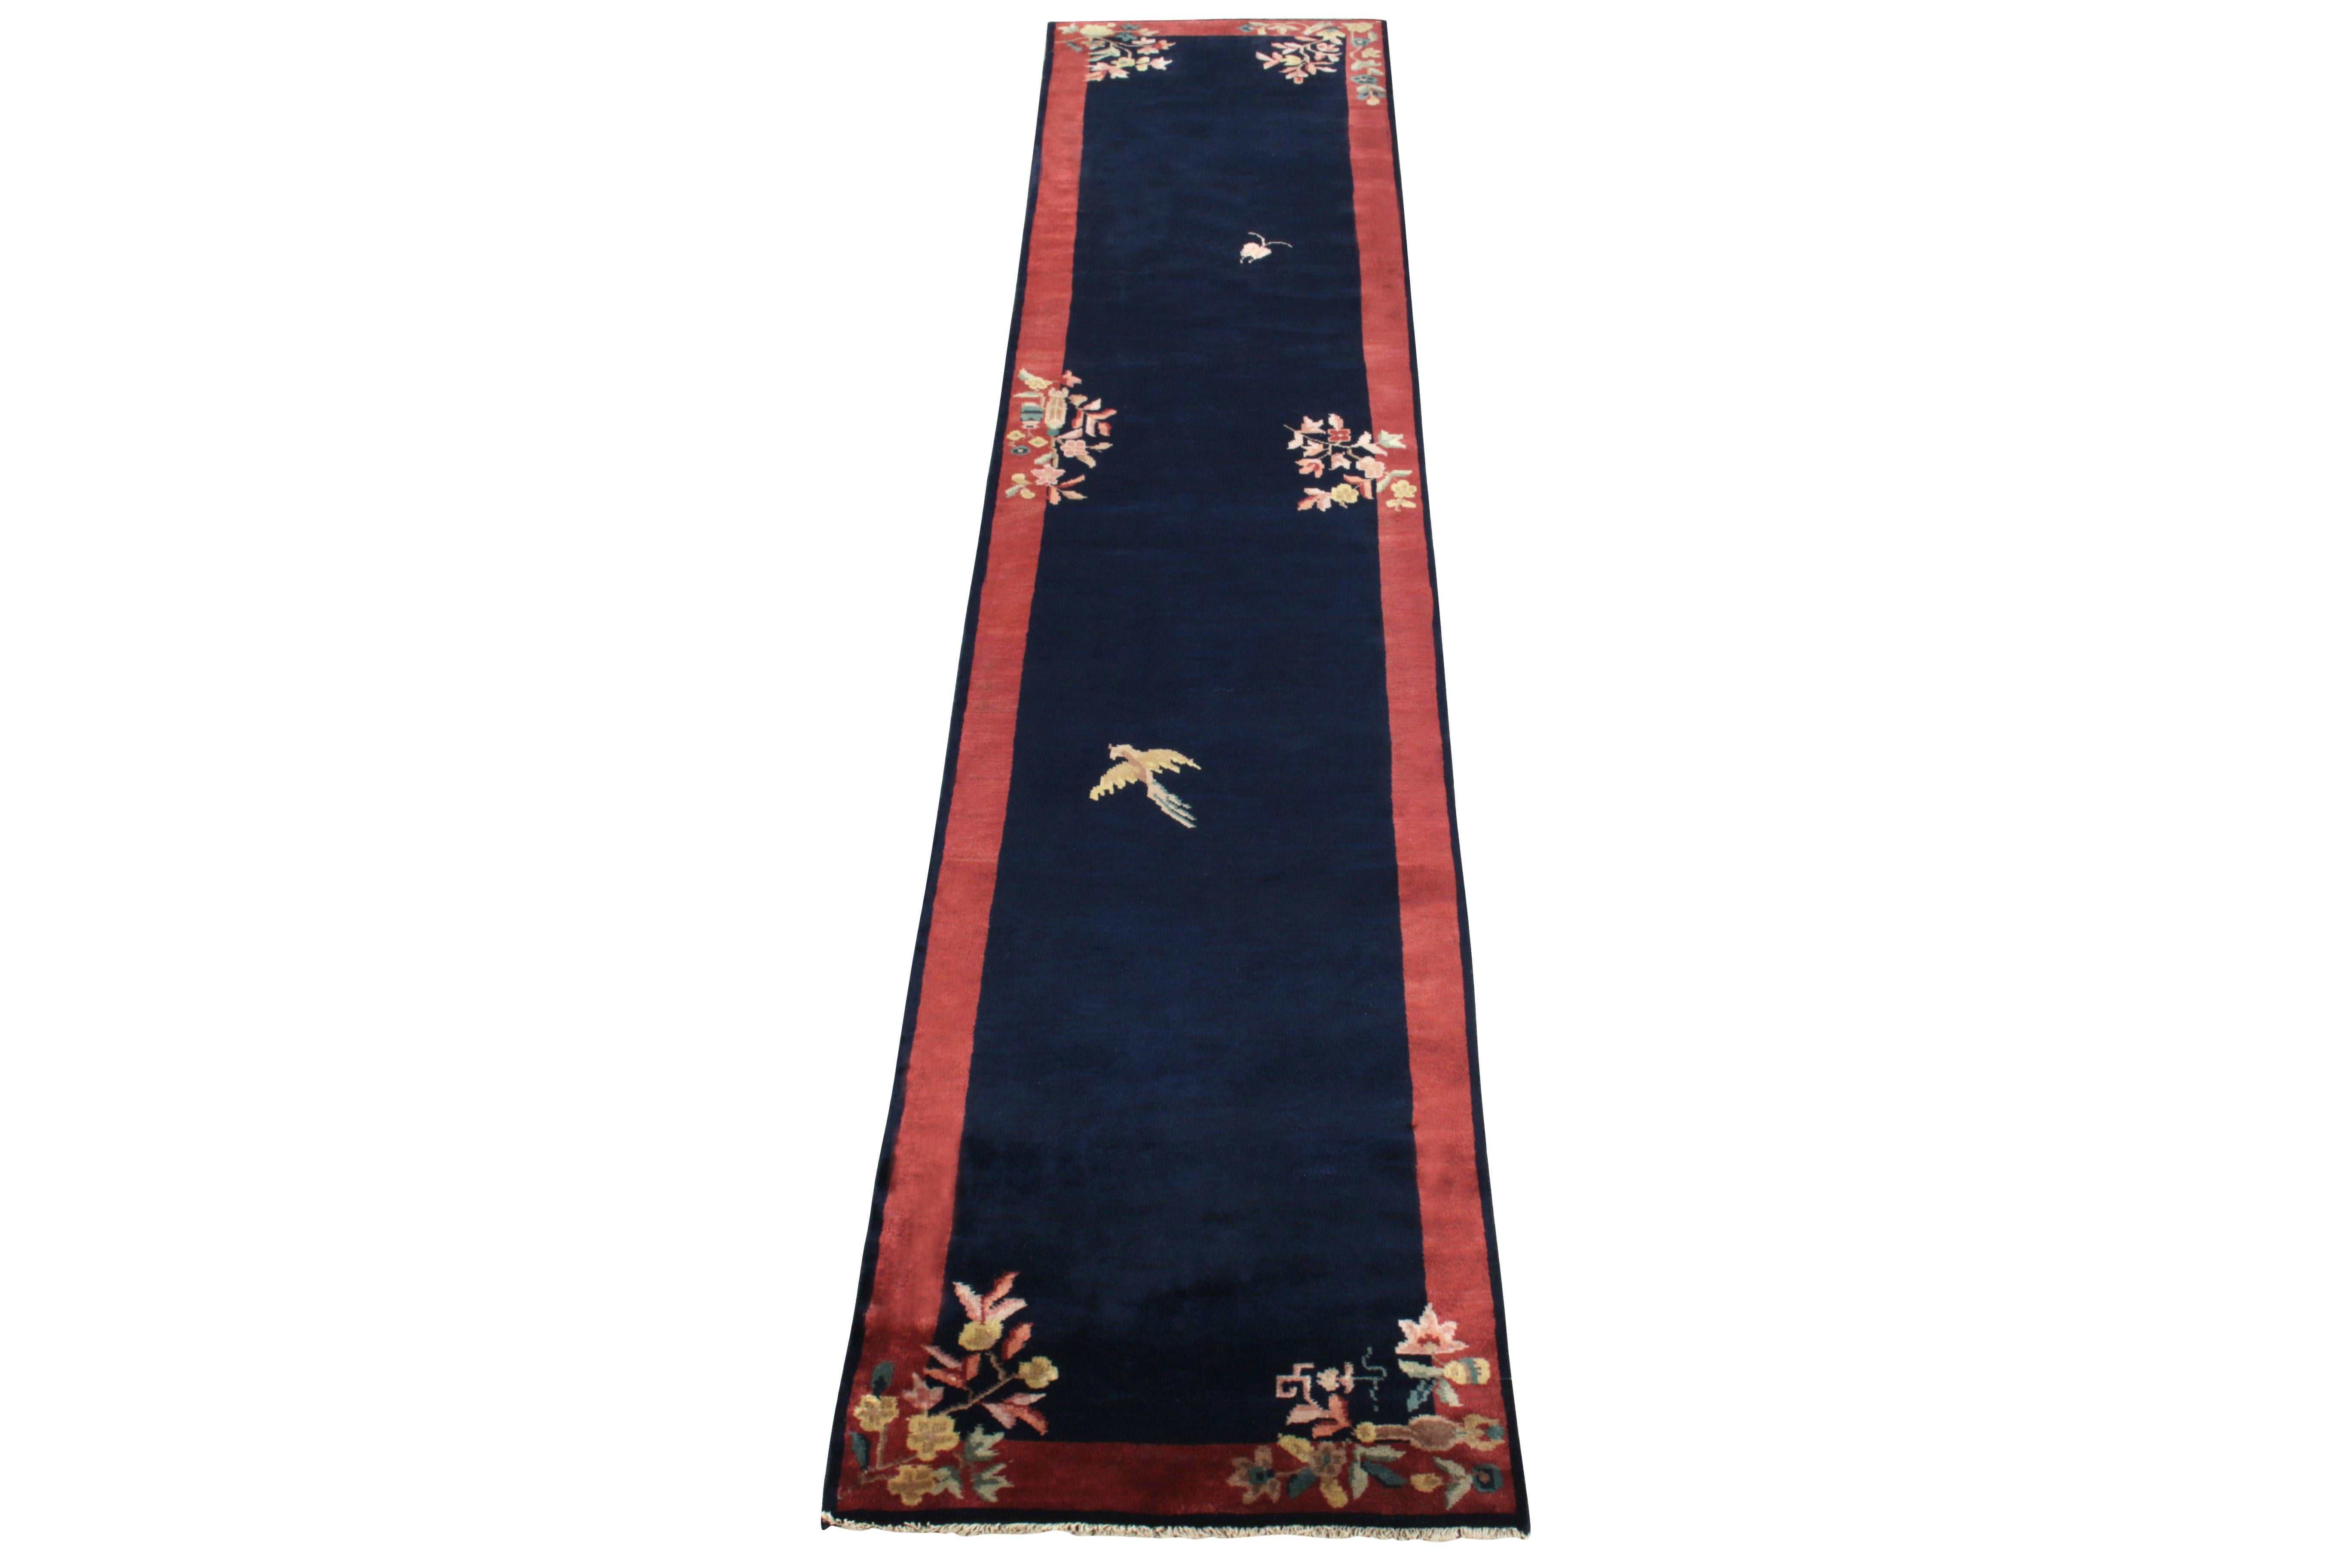 Hand-knotted in wool, a 2x11 ode to Chinese art deco rugs from our Antique & Vintage collection bearing classic sensibilities of the 1920s. This vintage rug enjoys a healthy pile with mild light and dark spots on the deep blue field for a luxurious